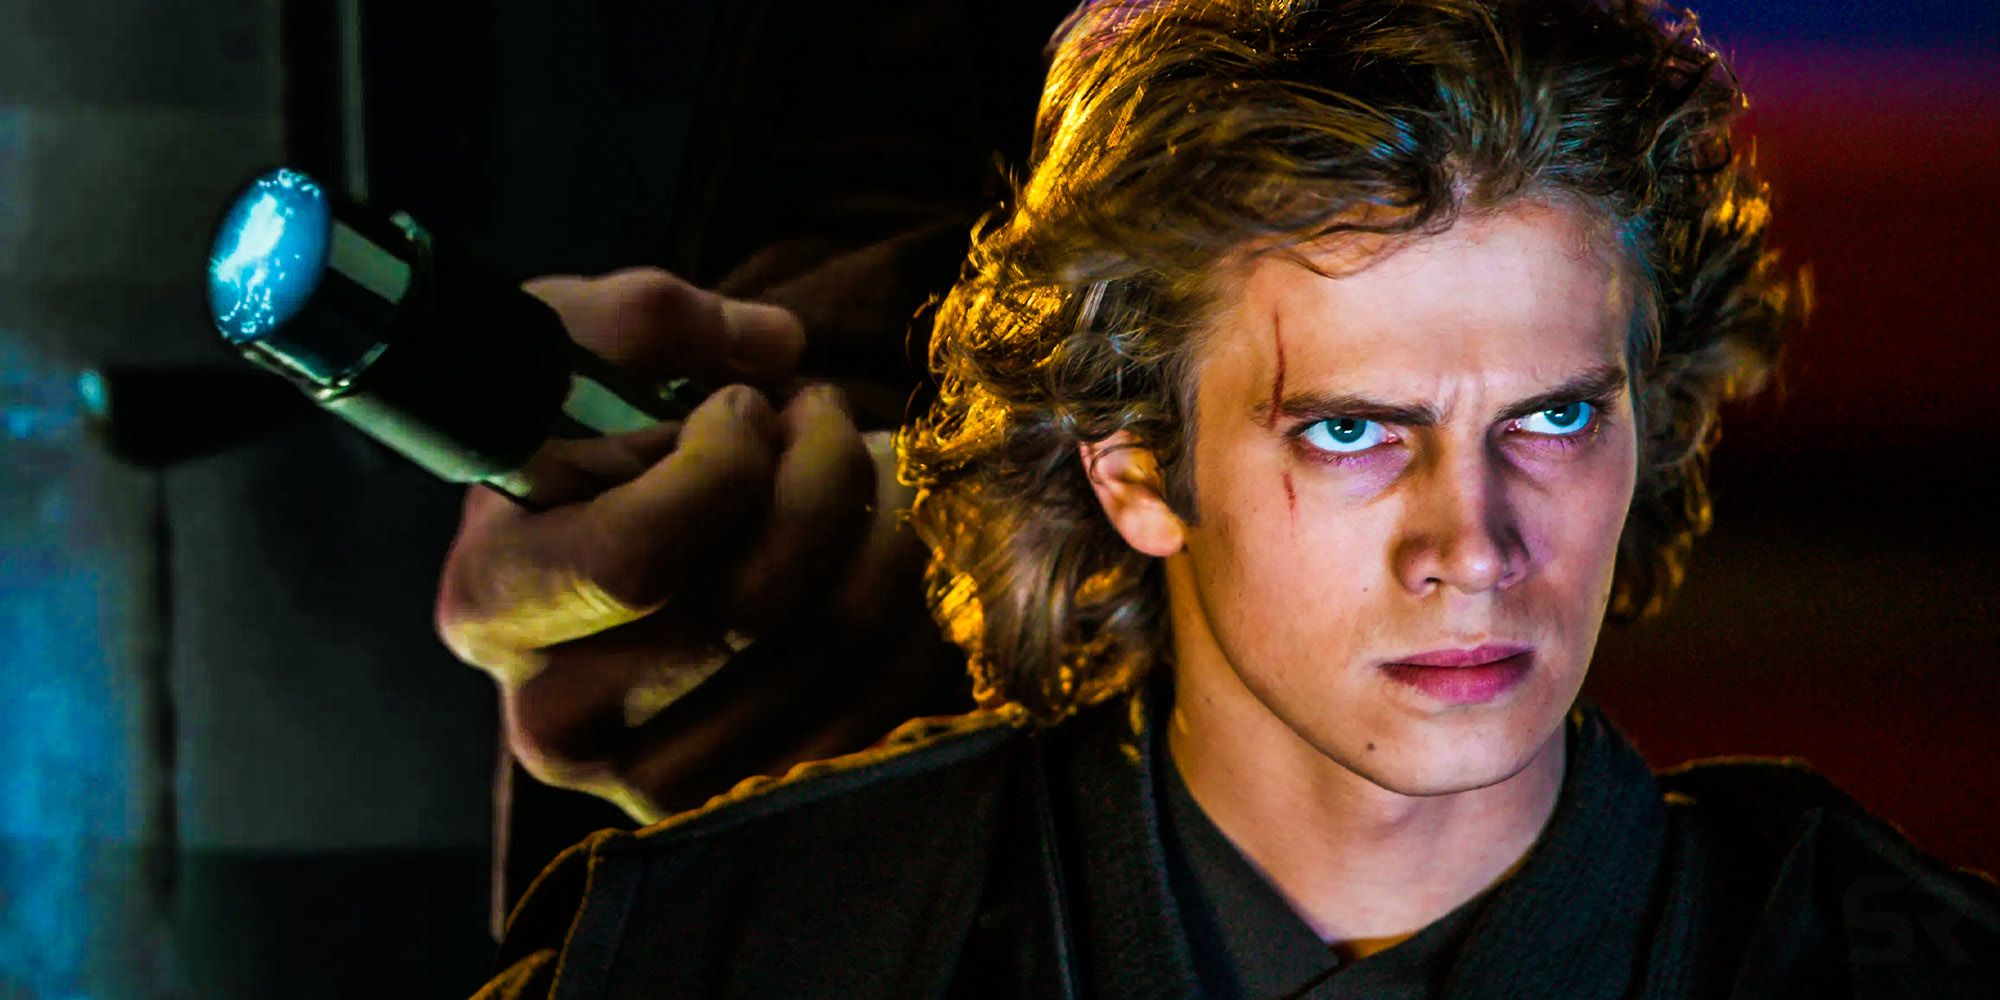 Anakin skywalker glowers on Mustafar while juxtaposed with a lightsaber.